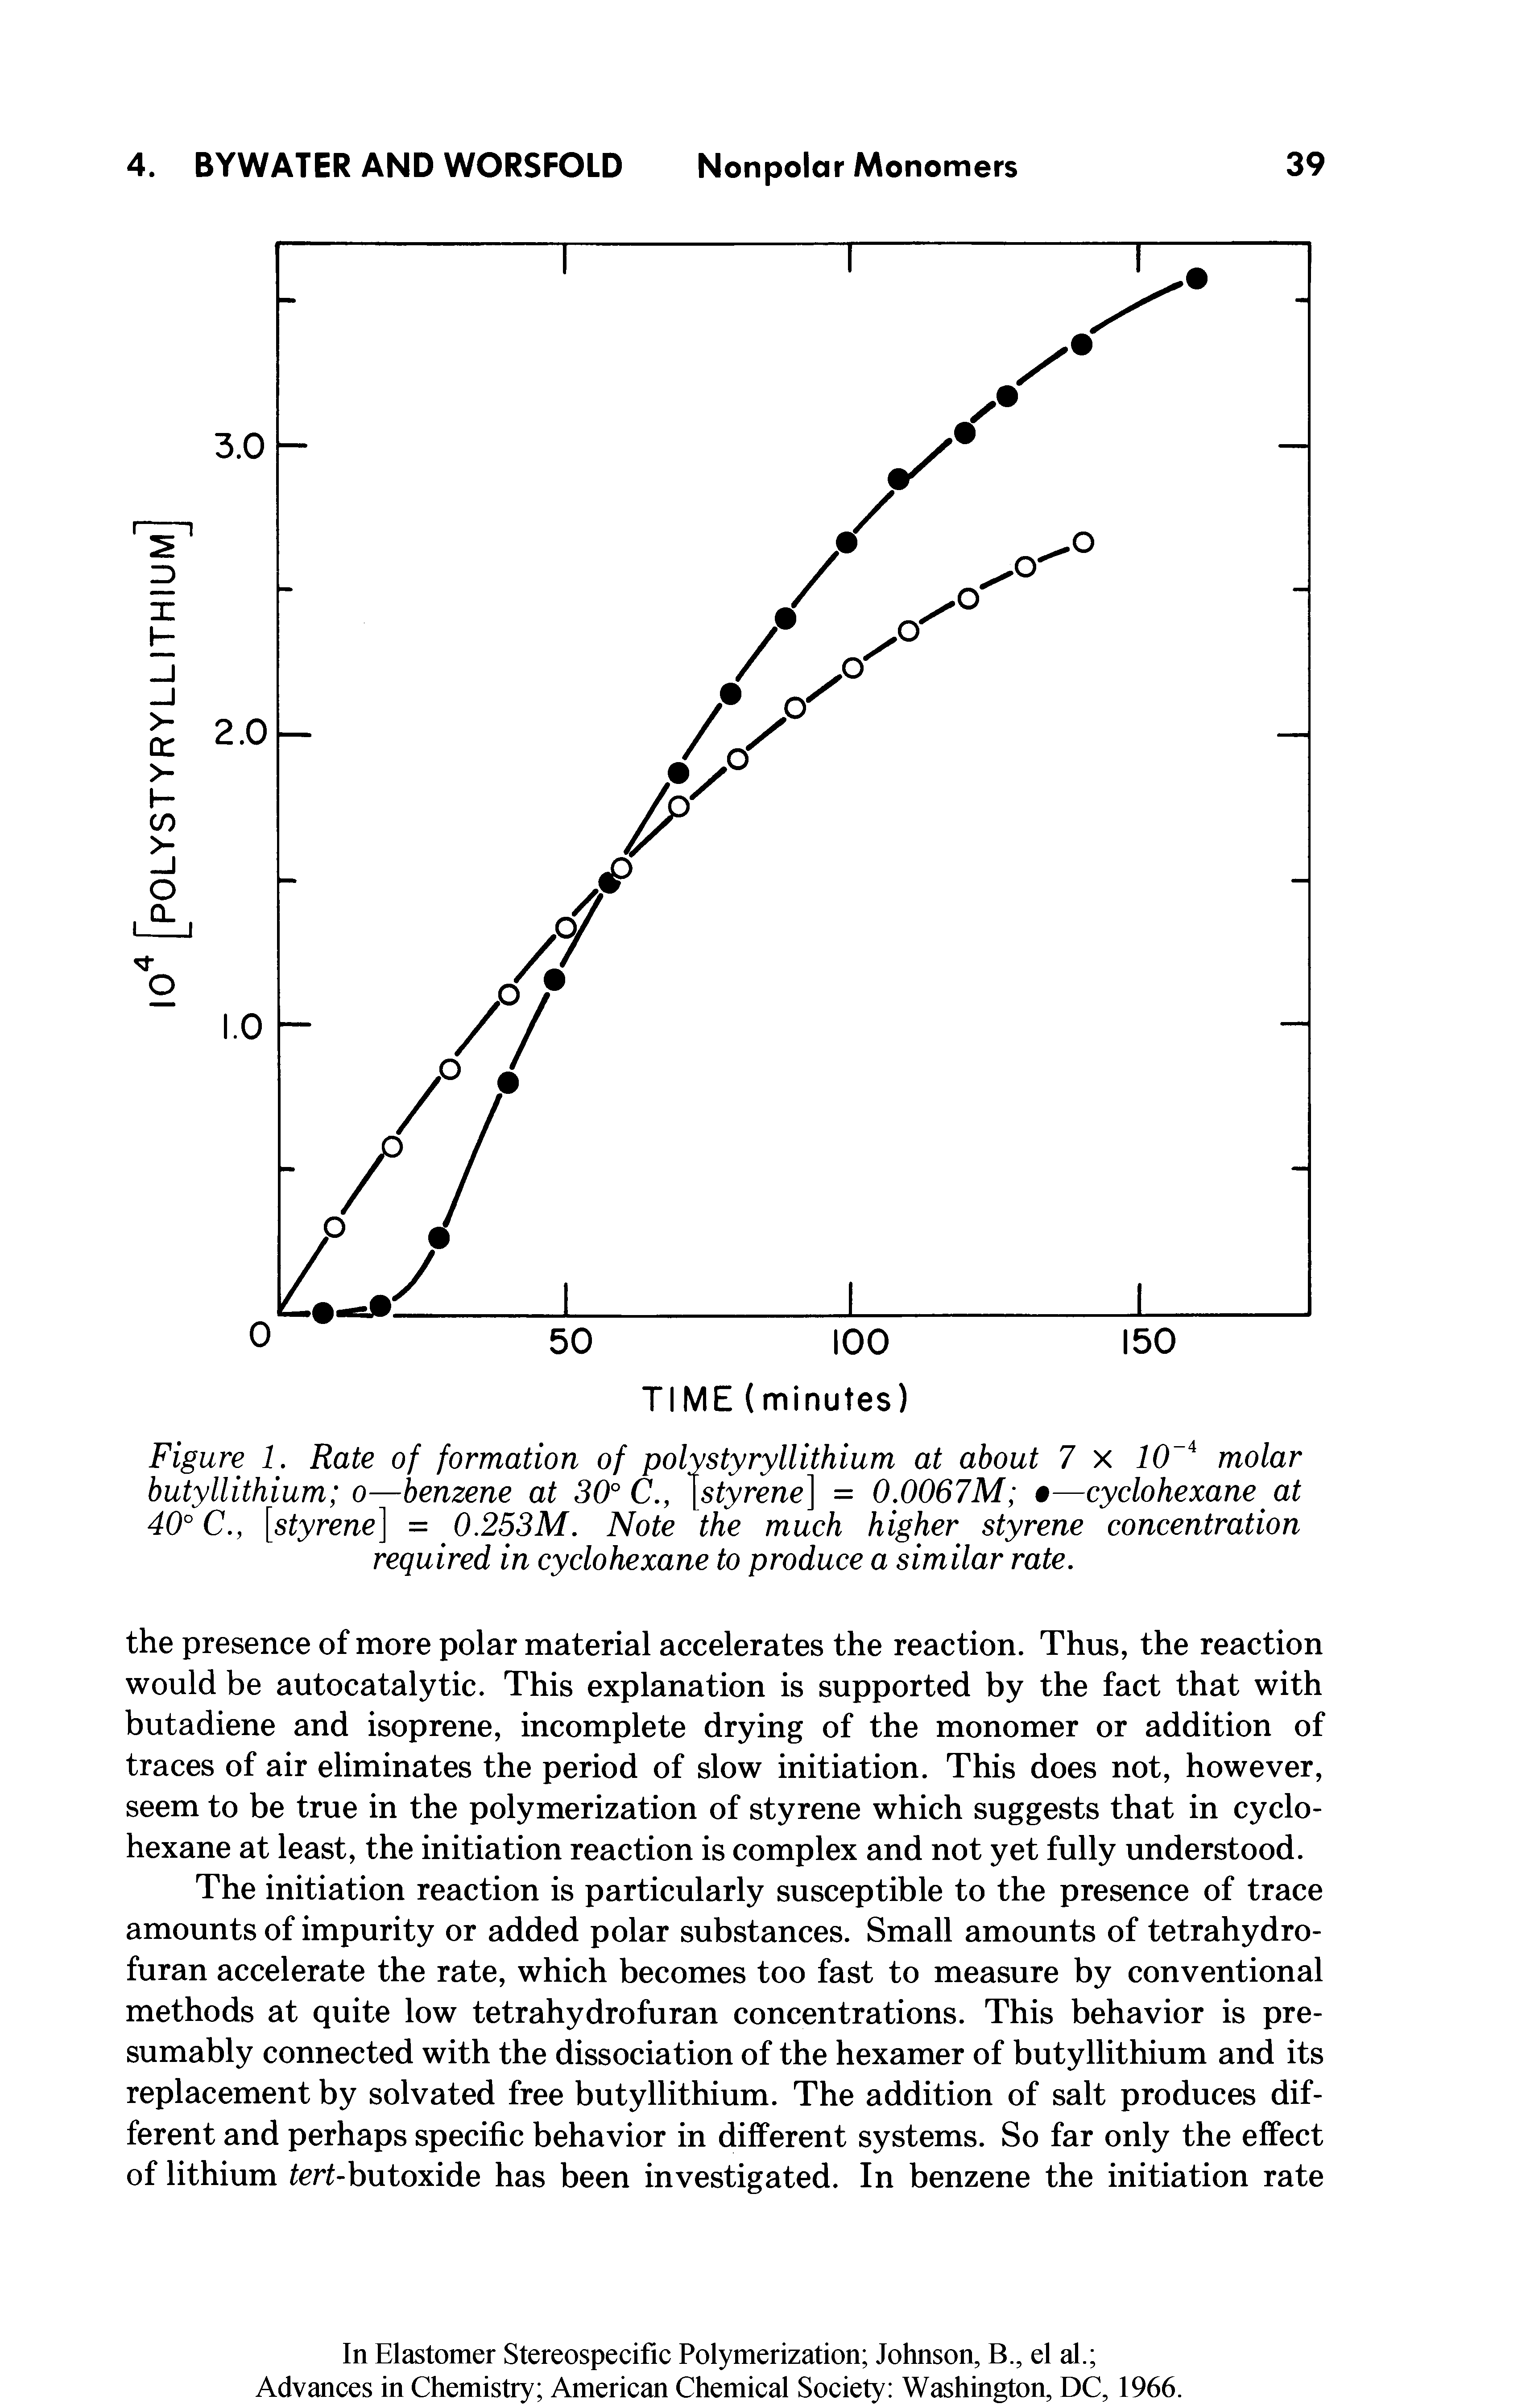 Figure 1. Rate of formation of polystyryllithium at about 7 x 10 A molar butyllithium o—benzene at 30° C., [styrene] = 0.0067M —cyclohexane at 40° C., [styrene] = 0.253M. Note the much higher styrene concentration required in cyclohexane to produce a similar rate.